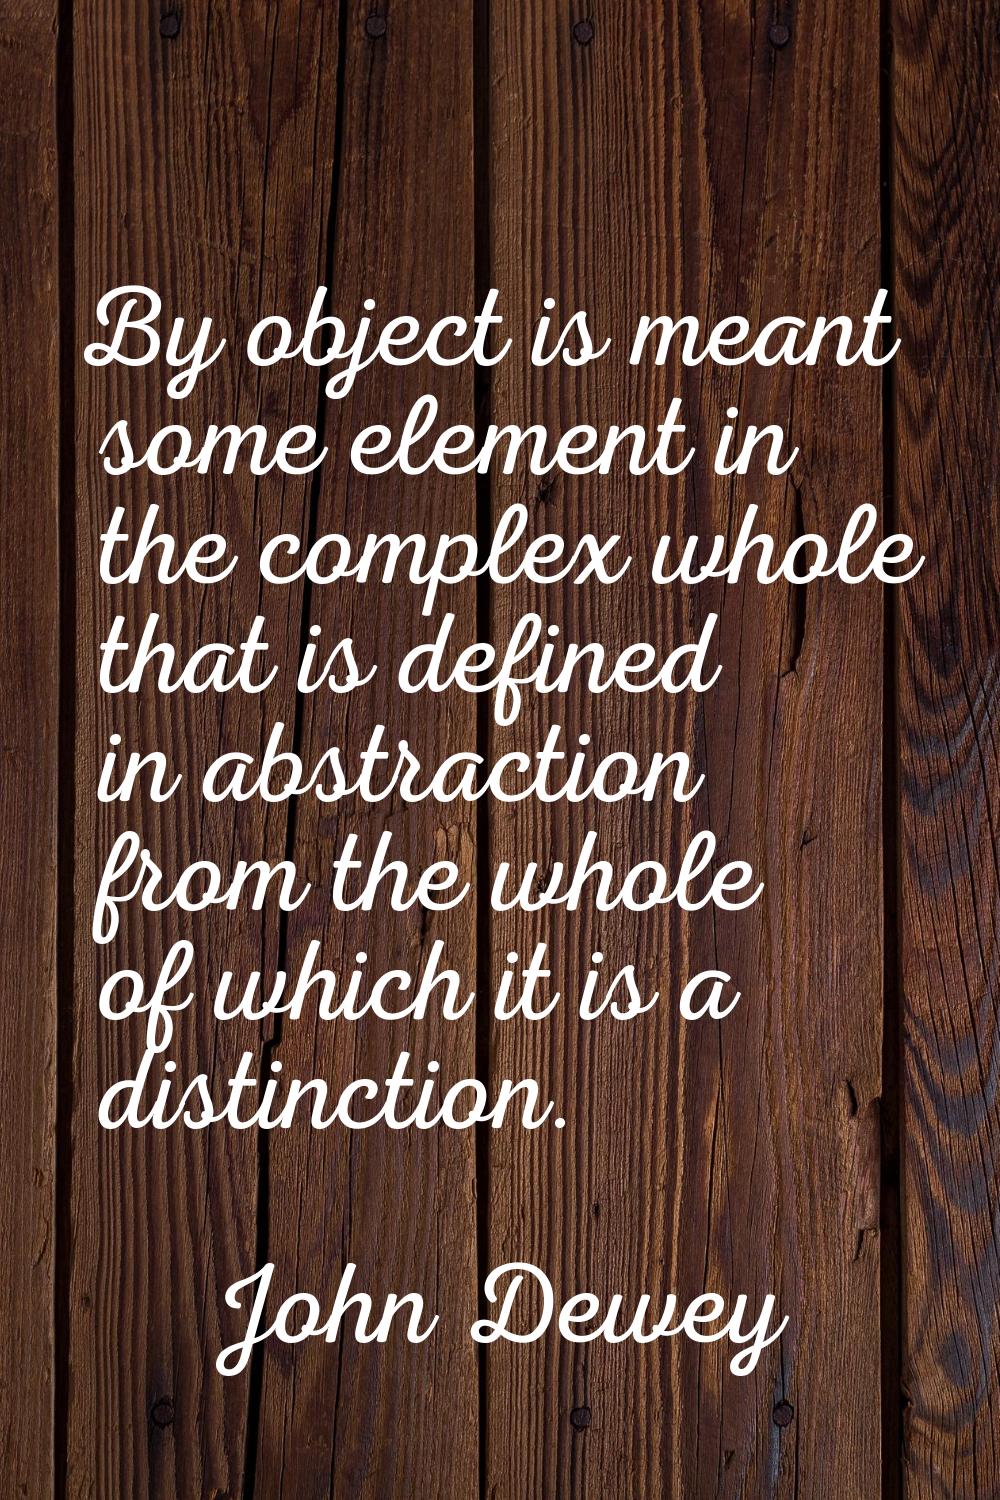 By object is meant some element in the complex whole that is defined in abstraction from the whole 